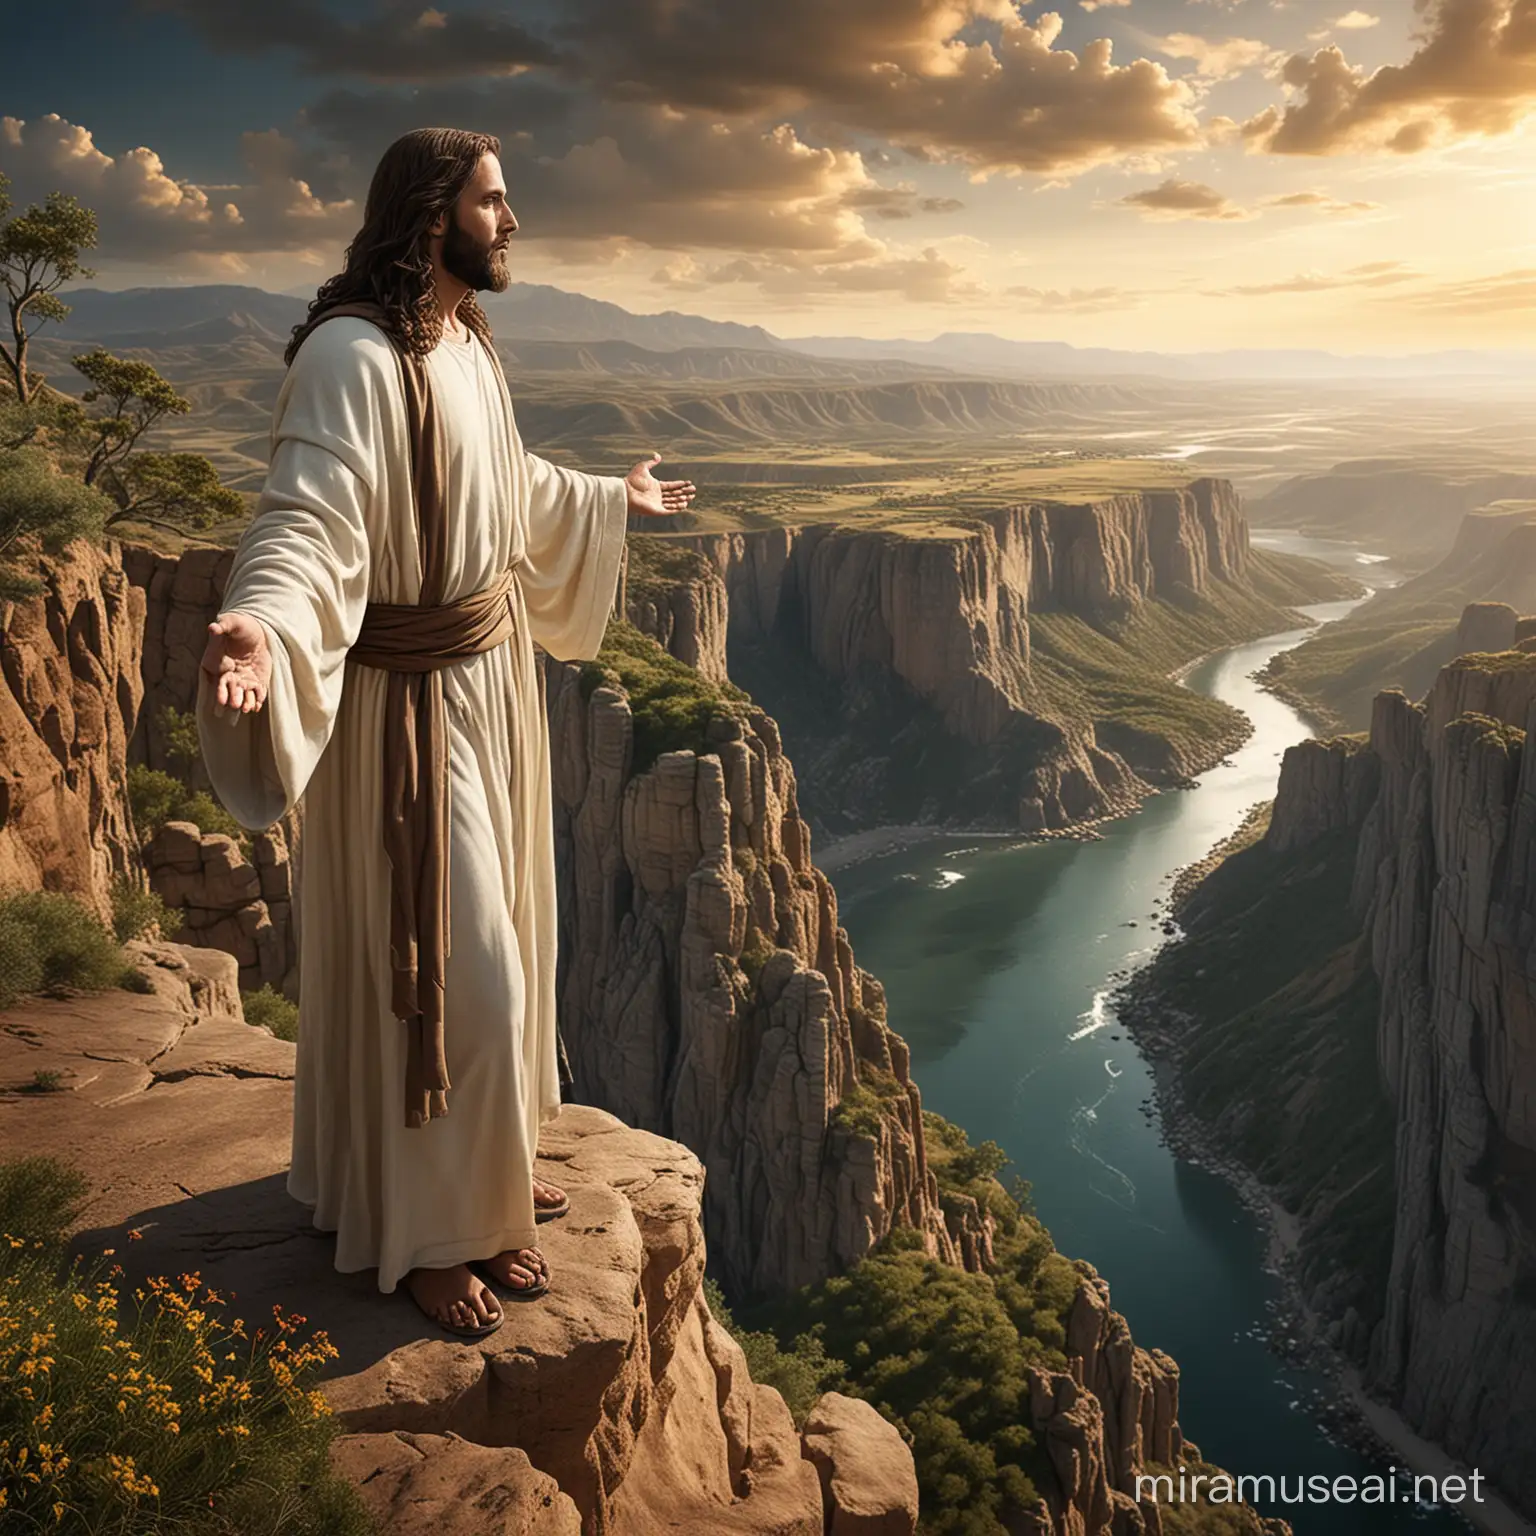 Majestic Jesus overlooking breathtaking scenery from a Cliff ...